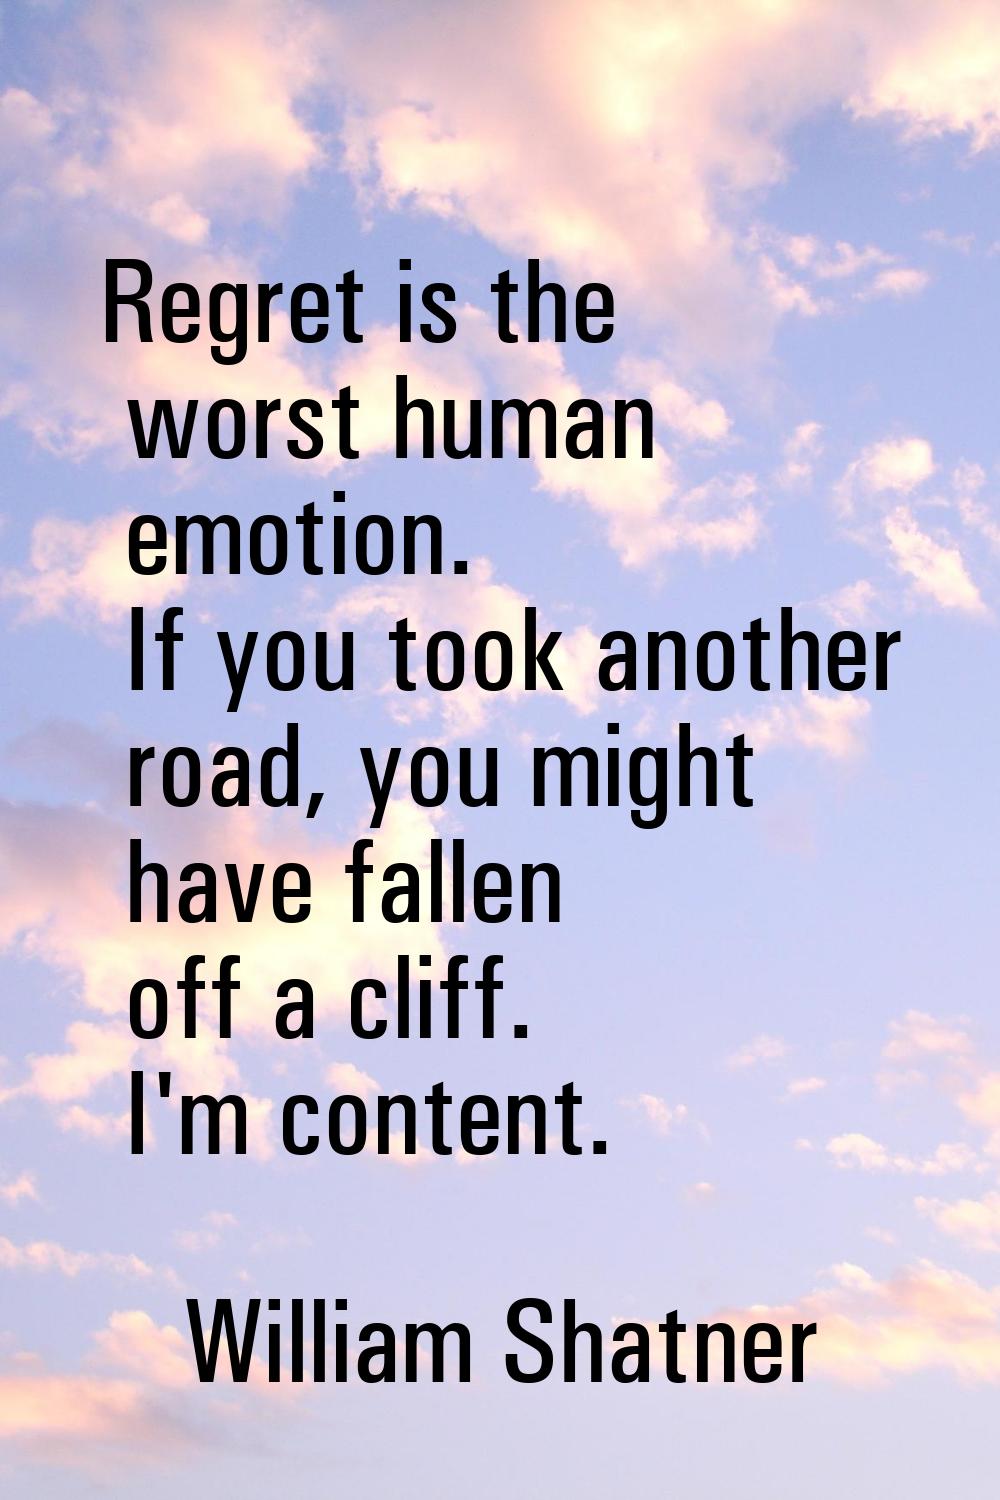 Regret is the worst human emotion. If you took another road, you might have fallen off a cliff. I'm